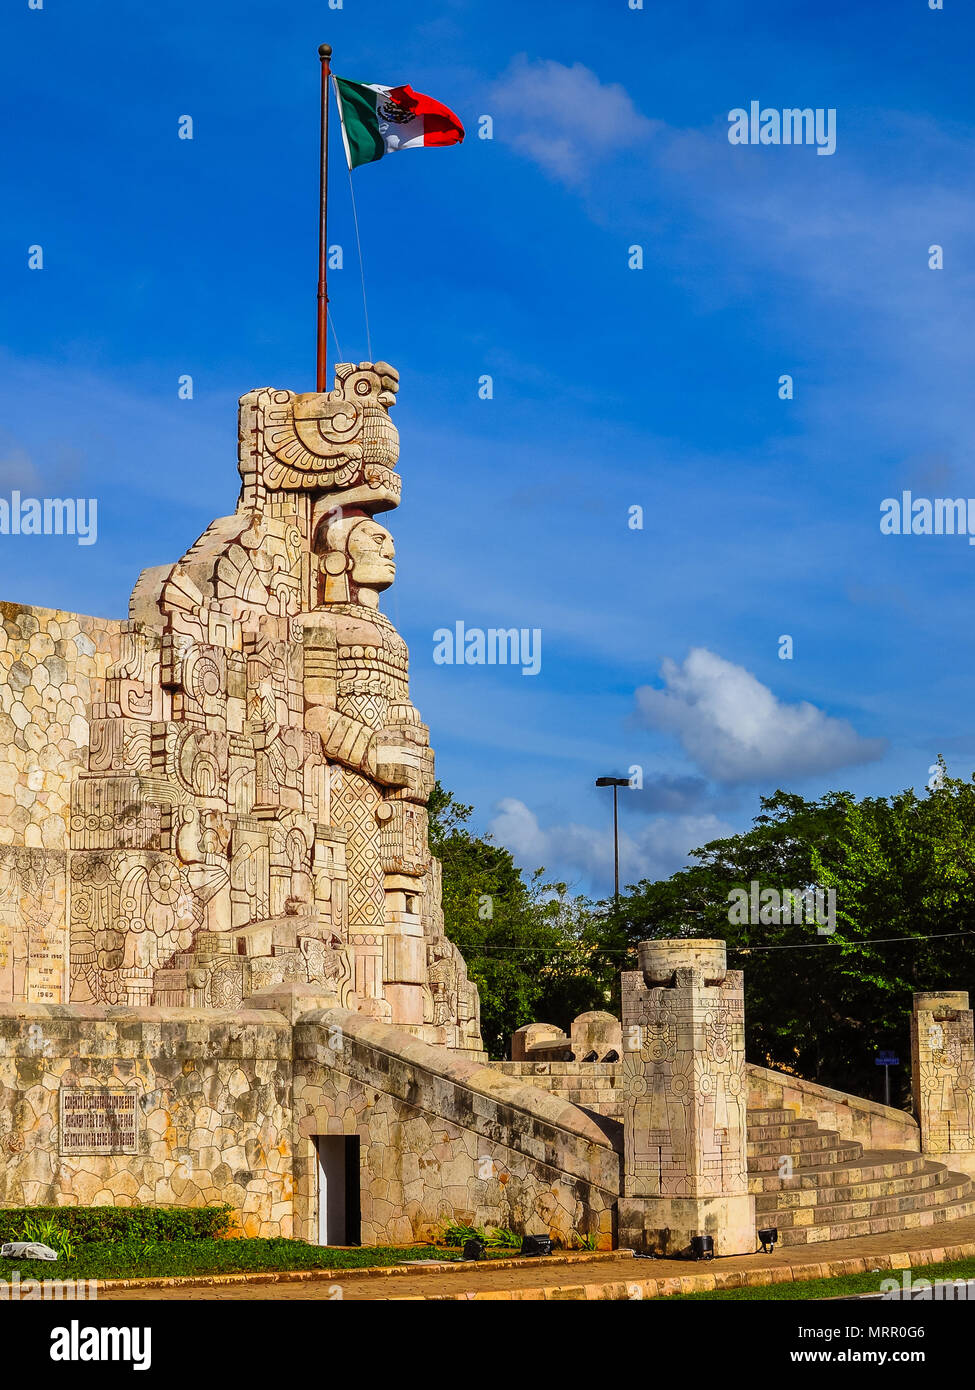 Merida, Mexico : Homeland Monument - depicts an important part of ...